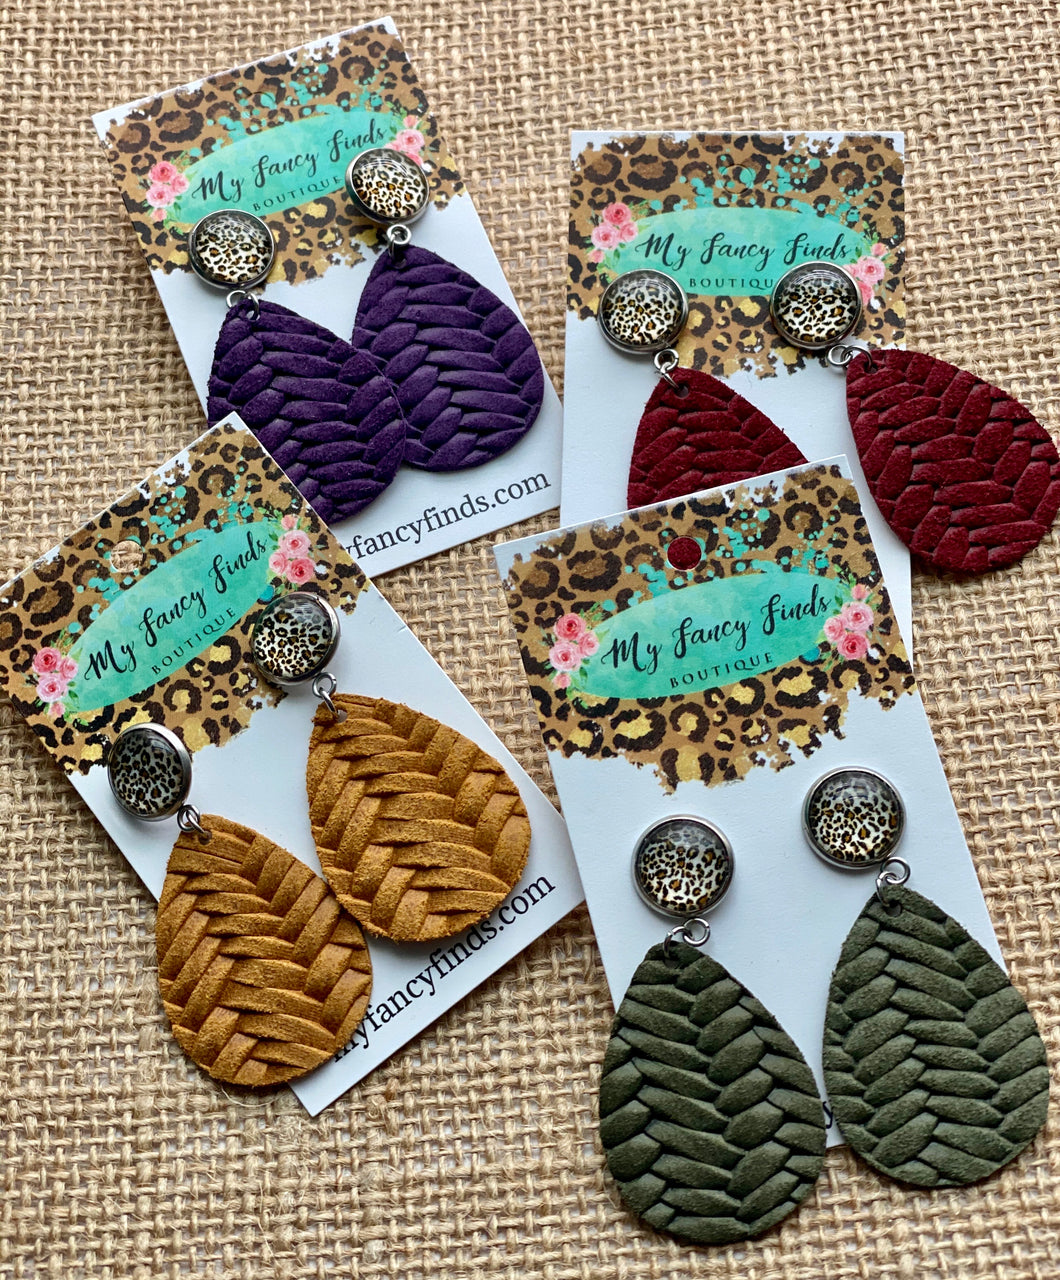 Leopard and Leather earrings